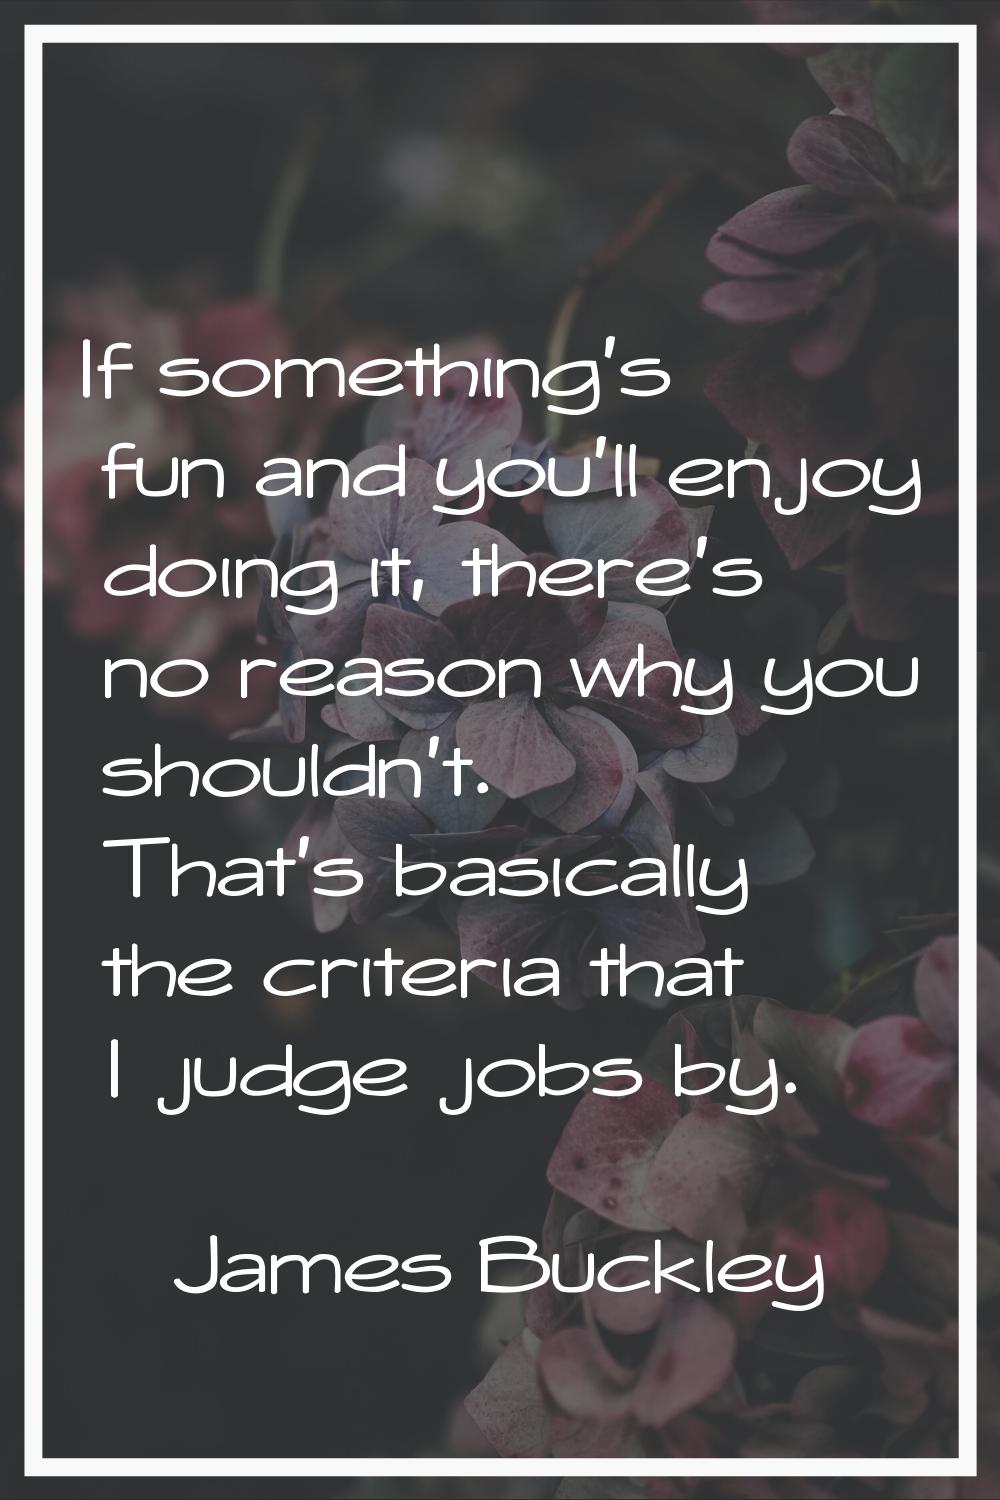 If something's fun and you'll enjoy doing it, there's no reason why you shouldn't. That's basically